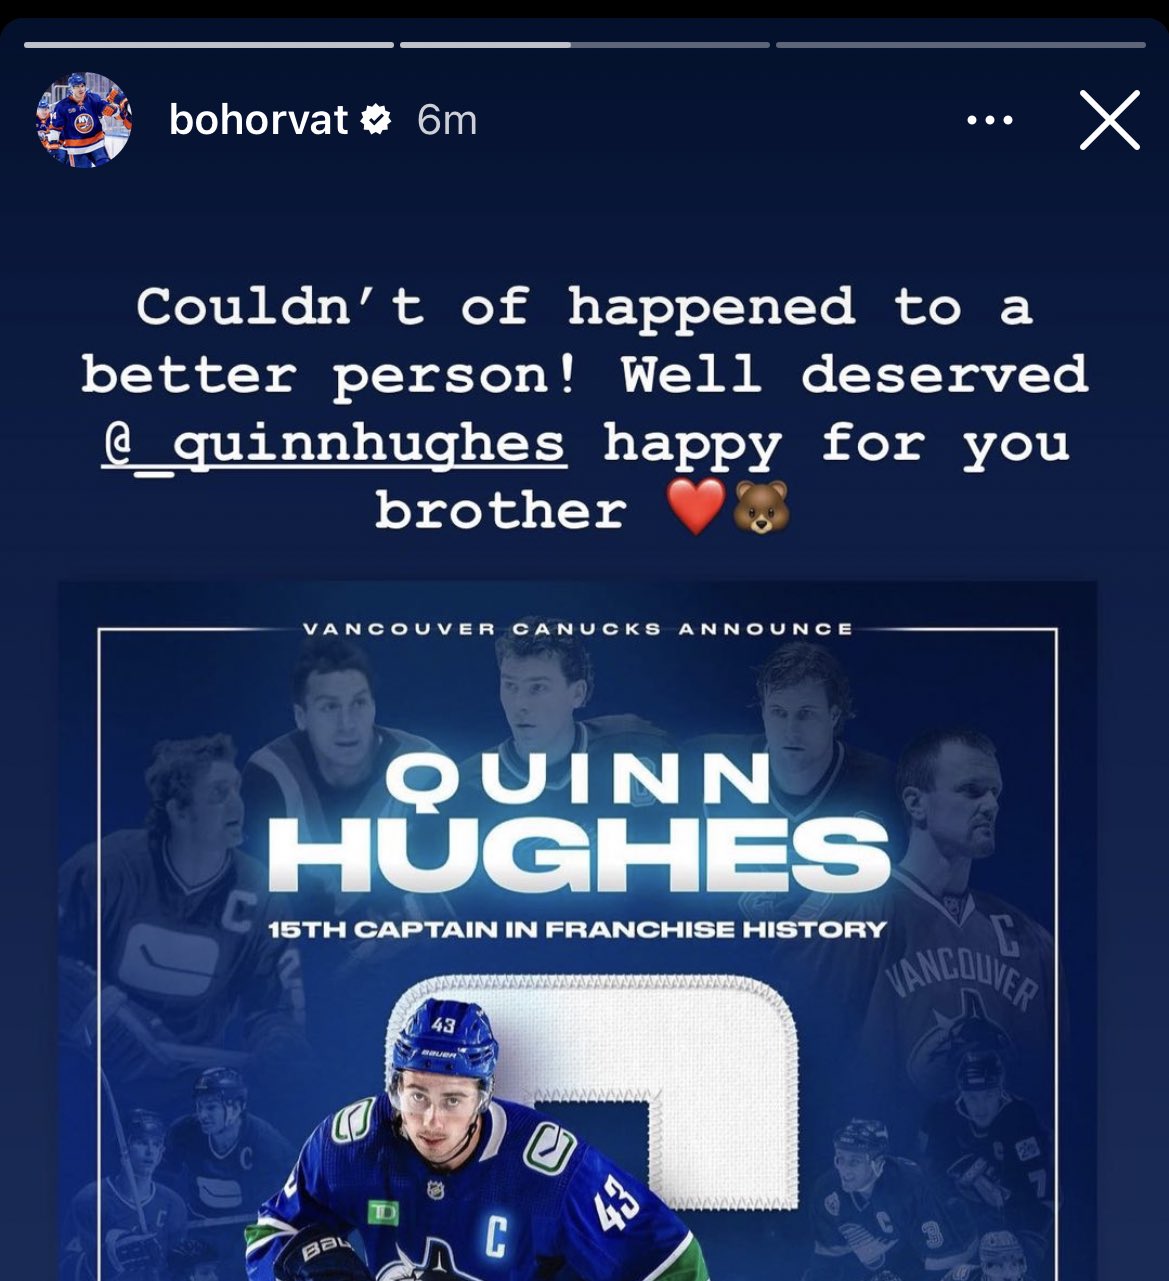 Glad we're doing it,' says Quinn Hughes as Canucks announce Pride